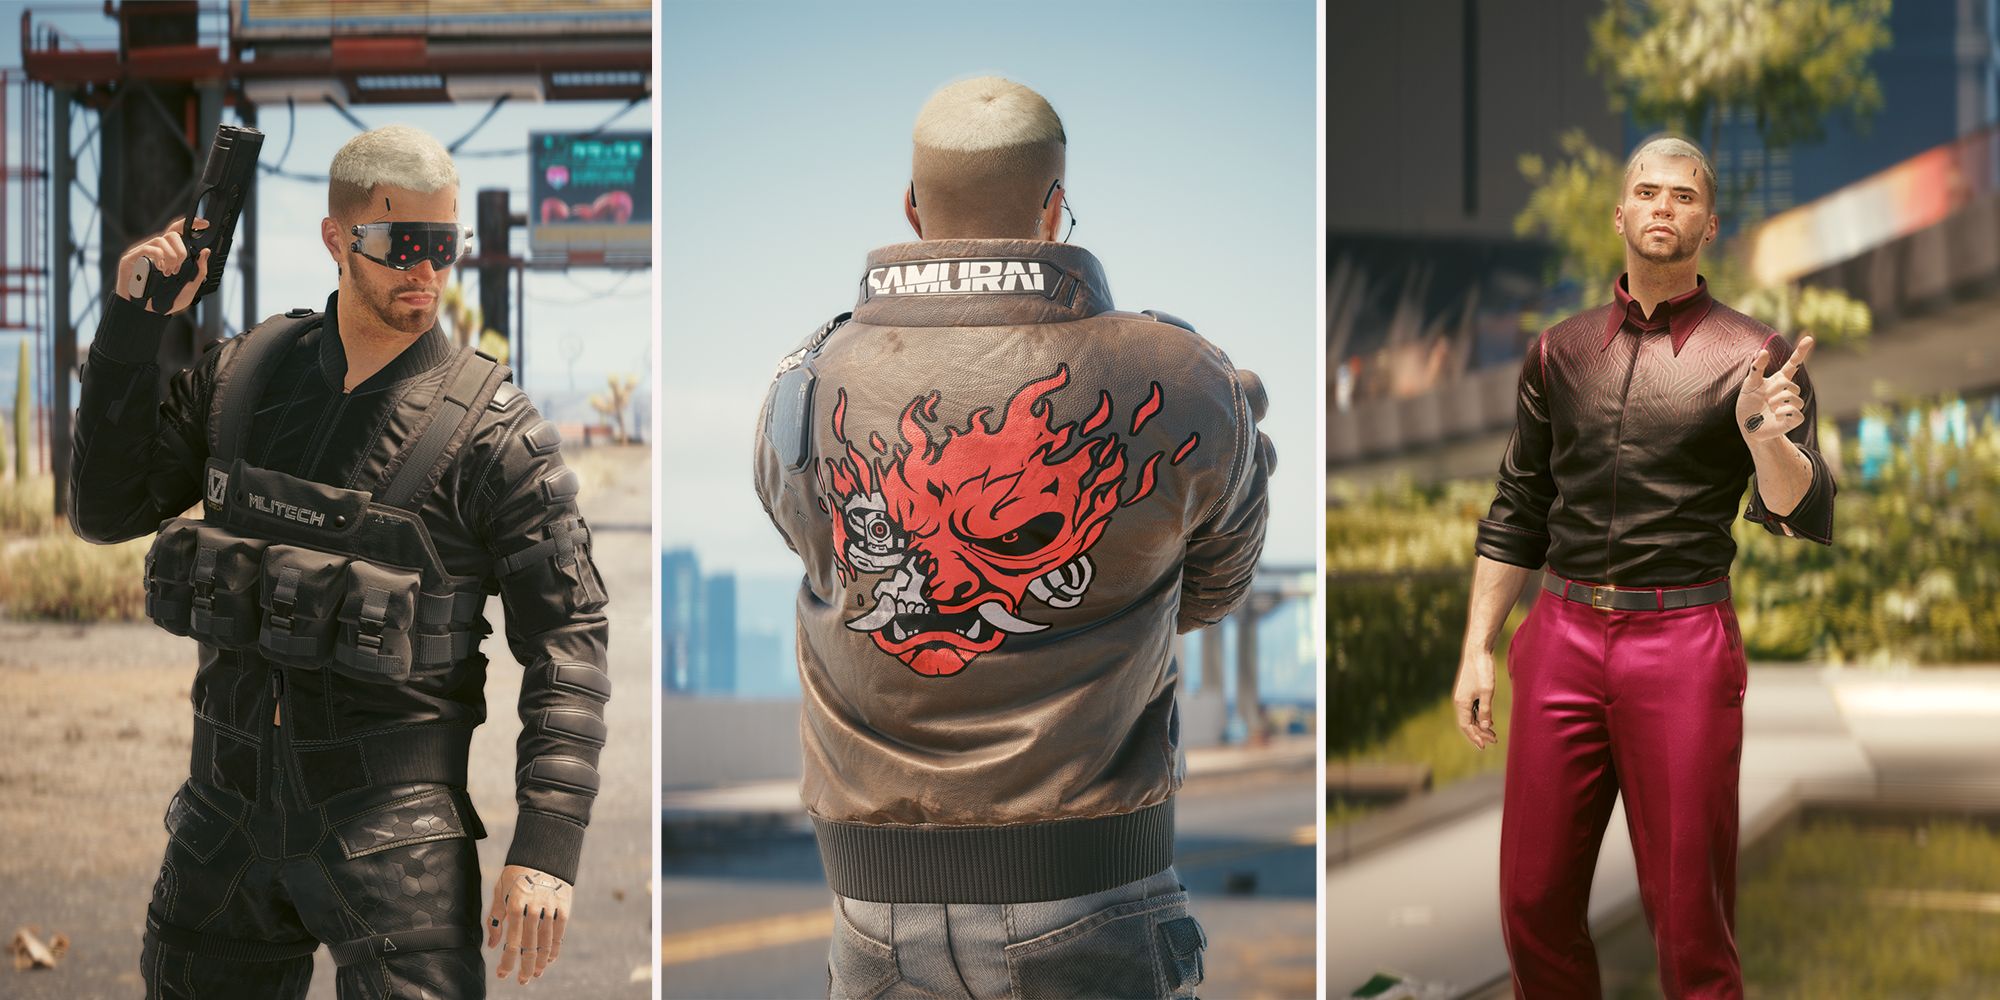 V posing with different clothing items in Cyberpunk 2077